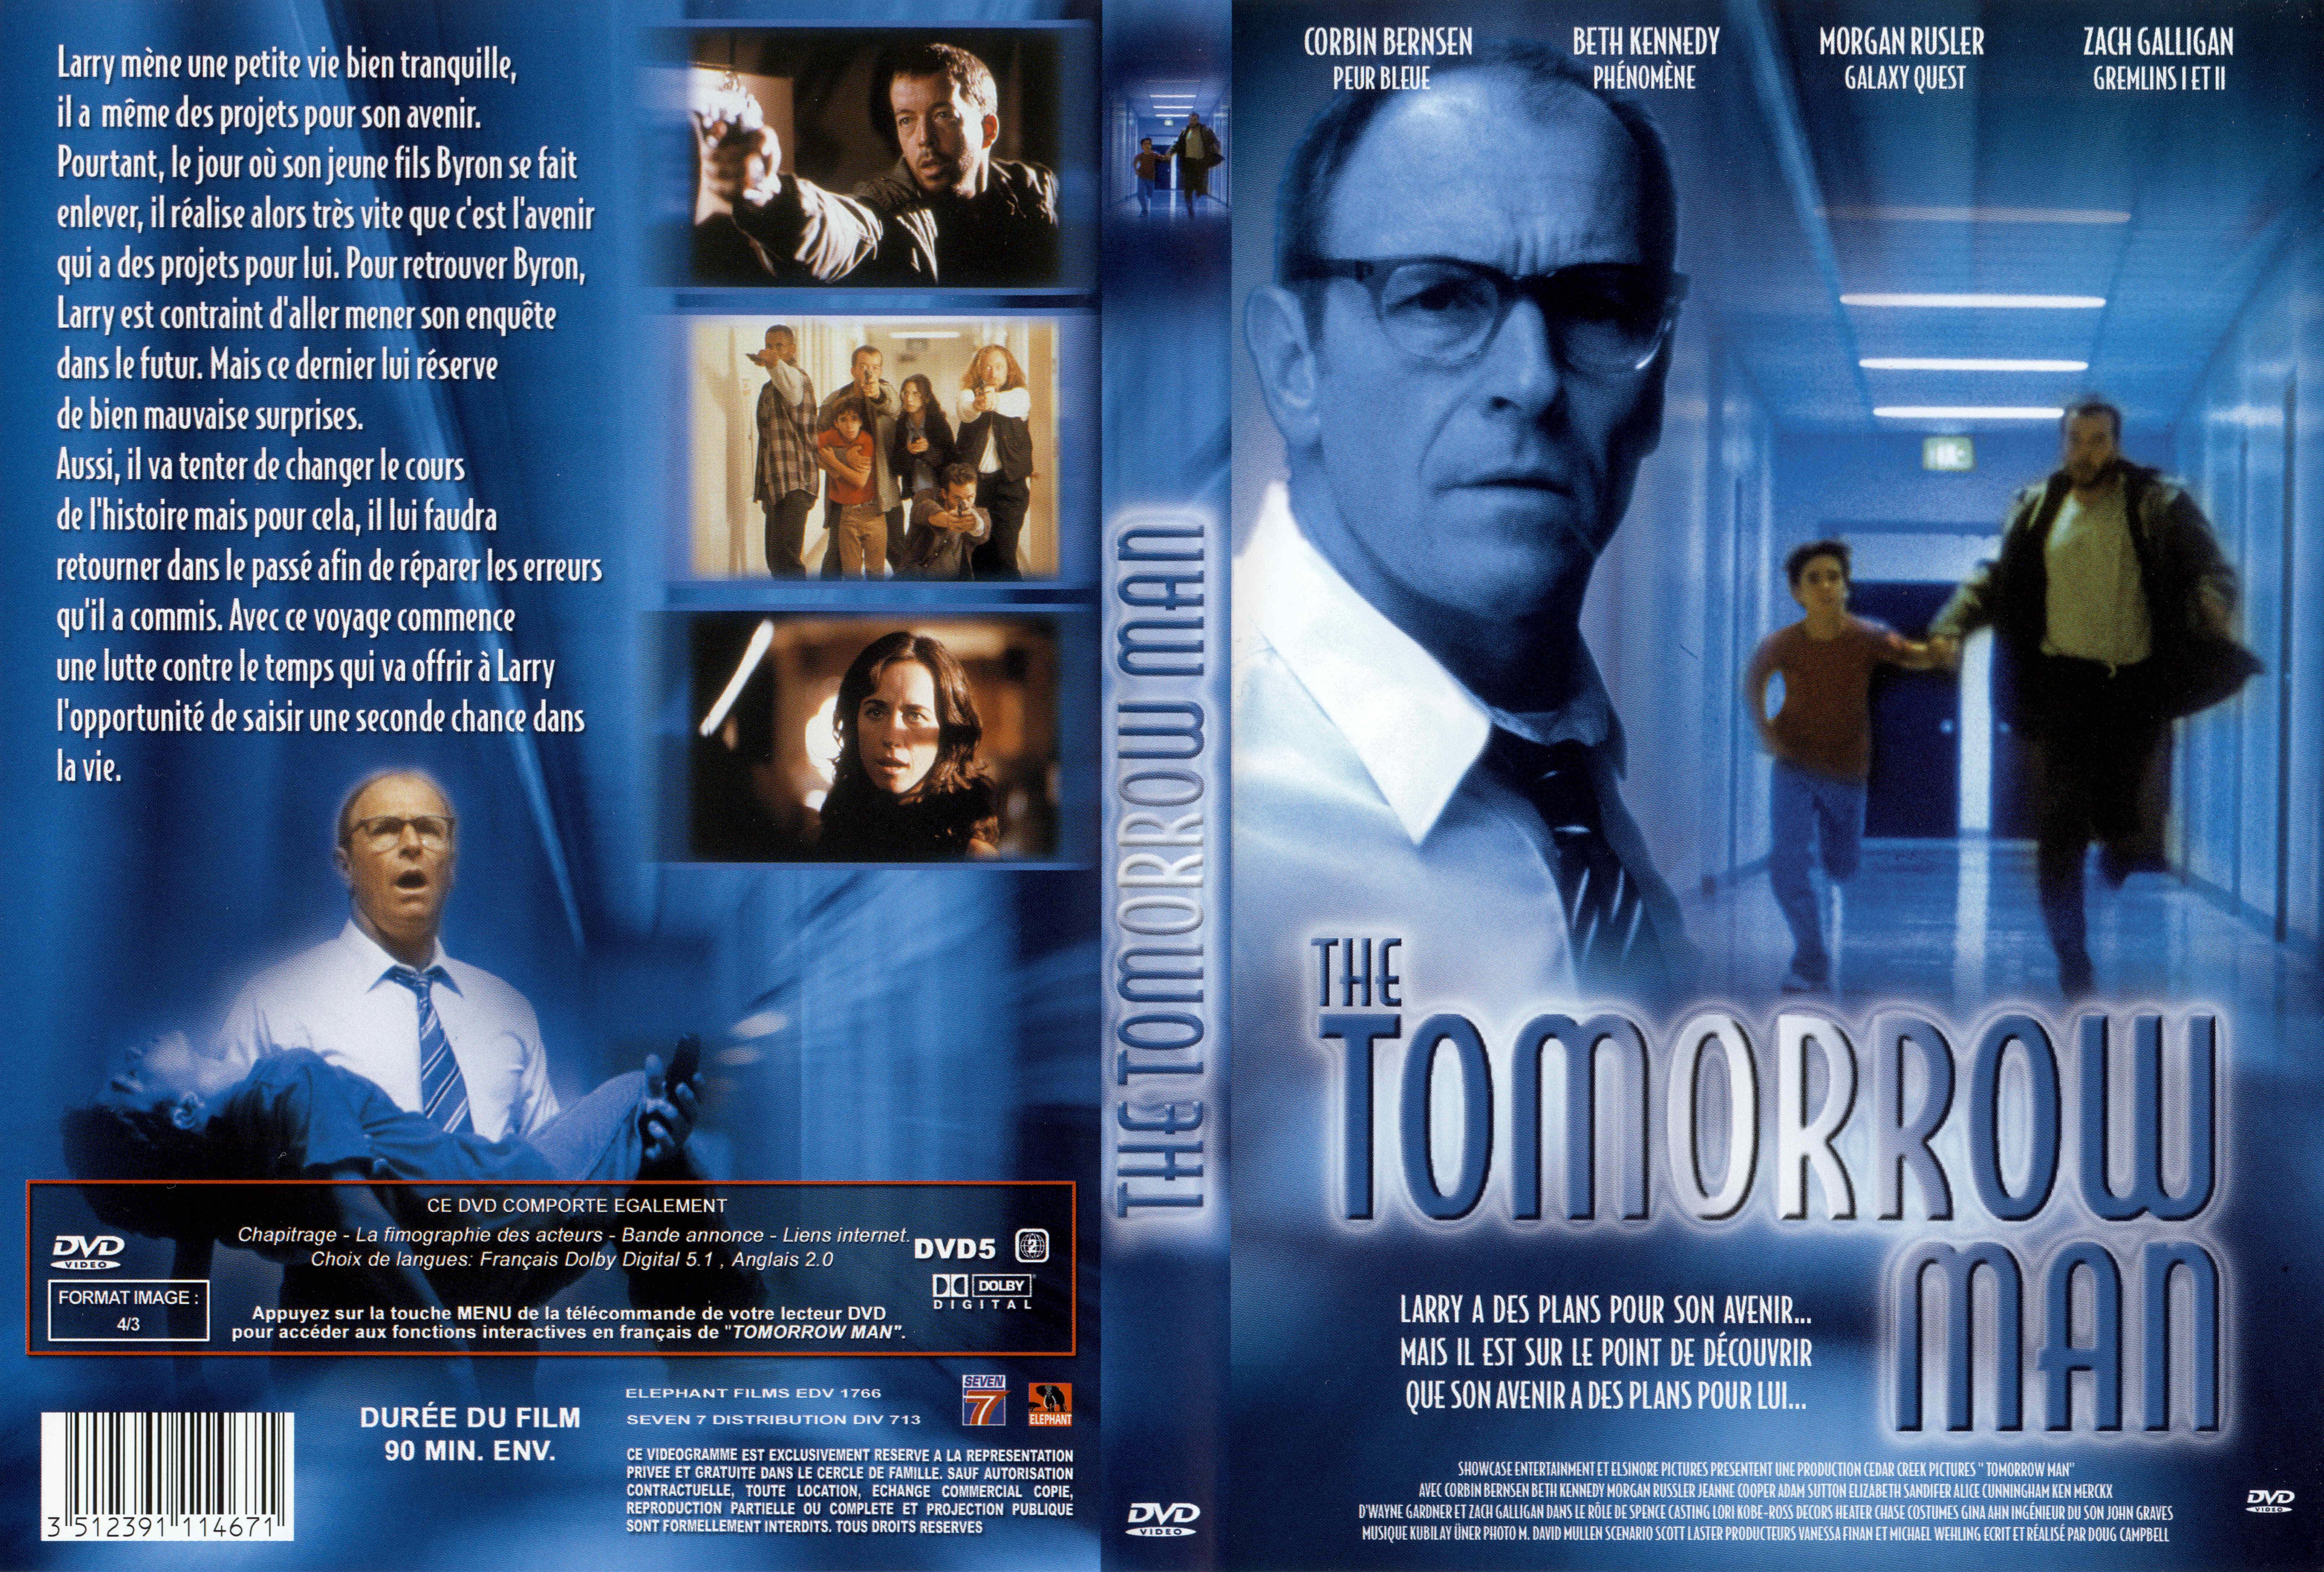 Jaquette DVD The tomorrow man